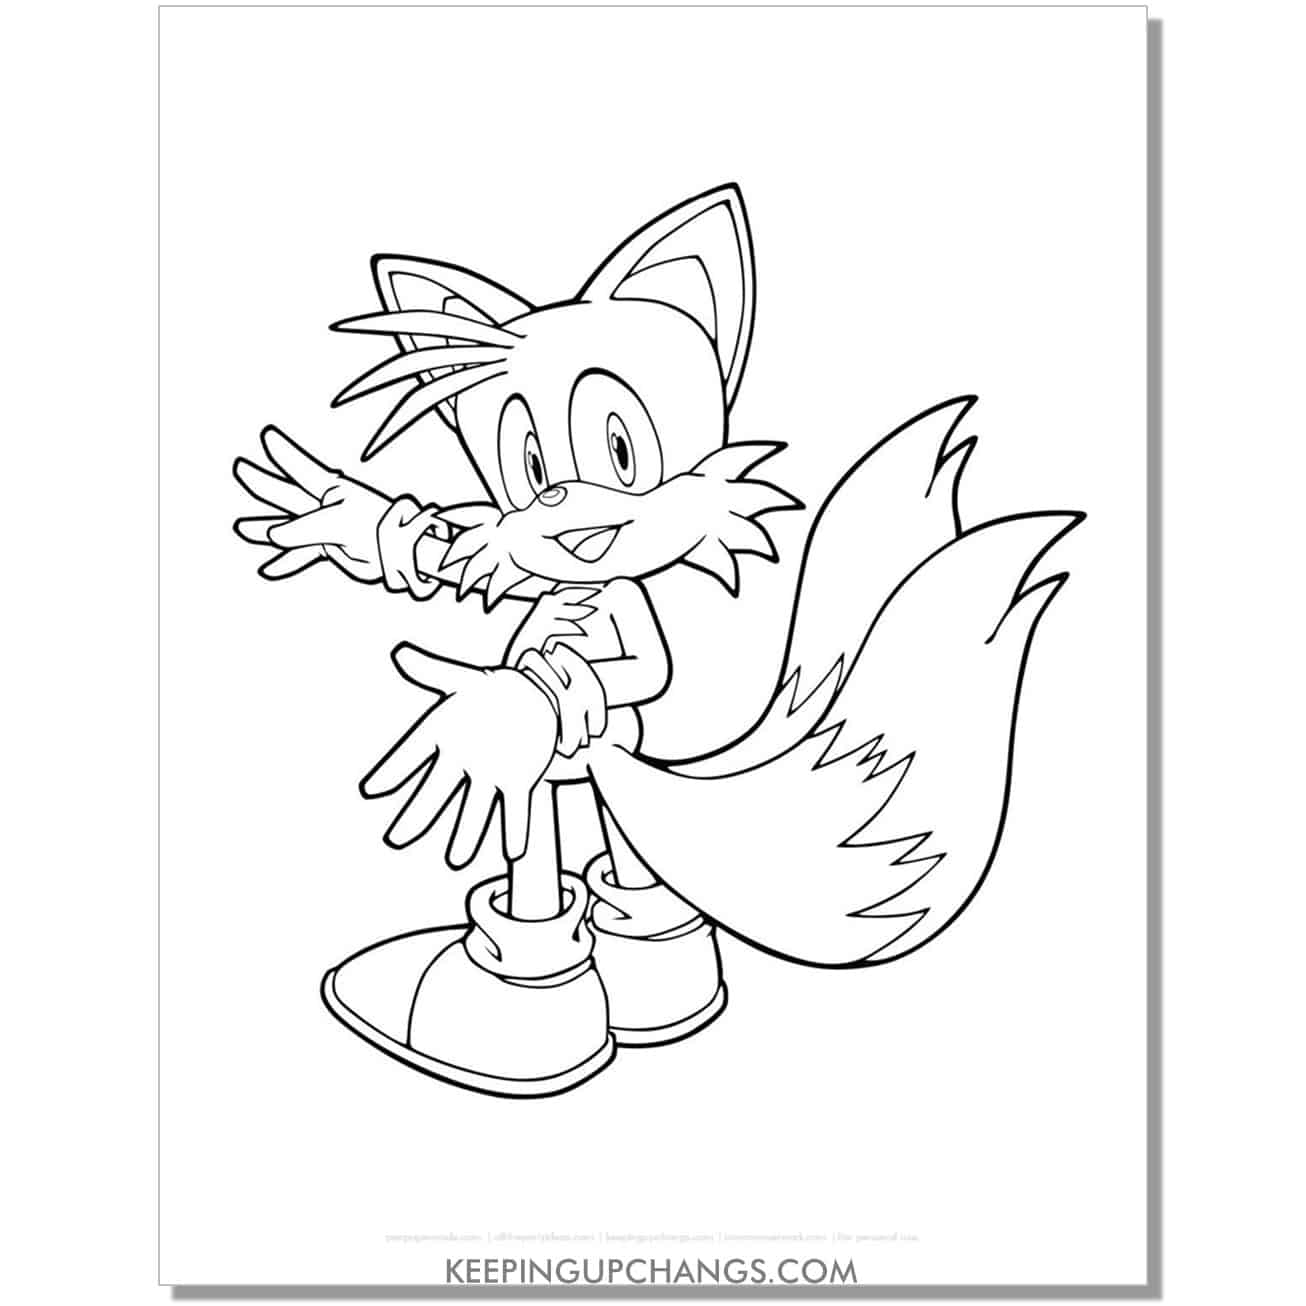 tails with arm out in front sonic coloring page.